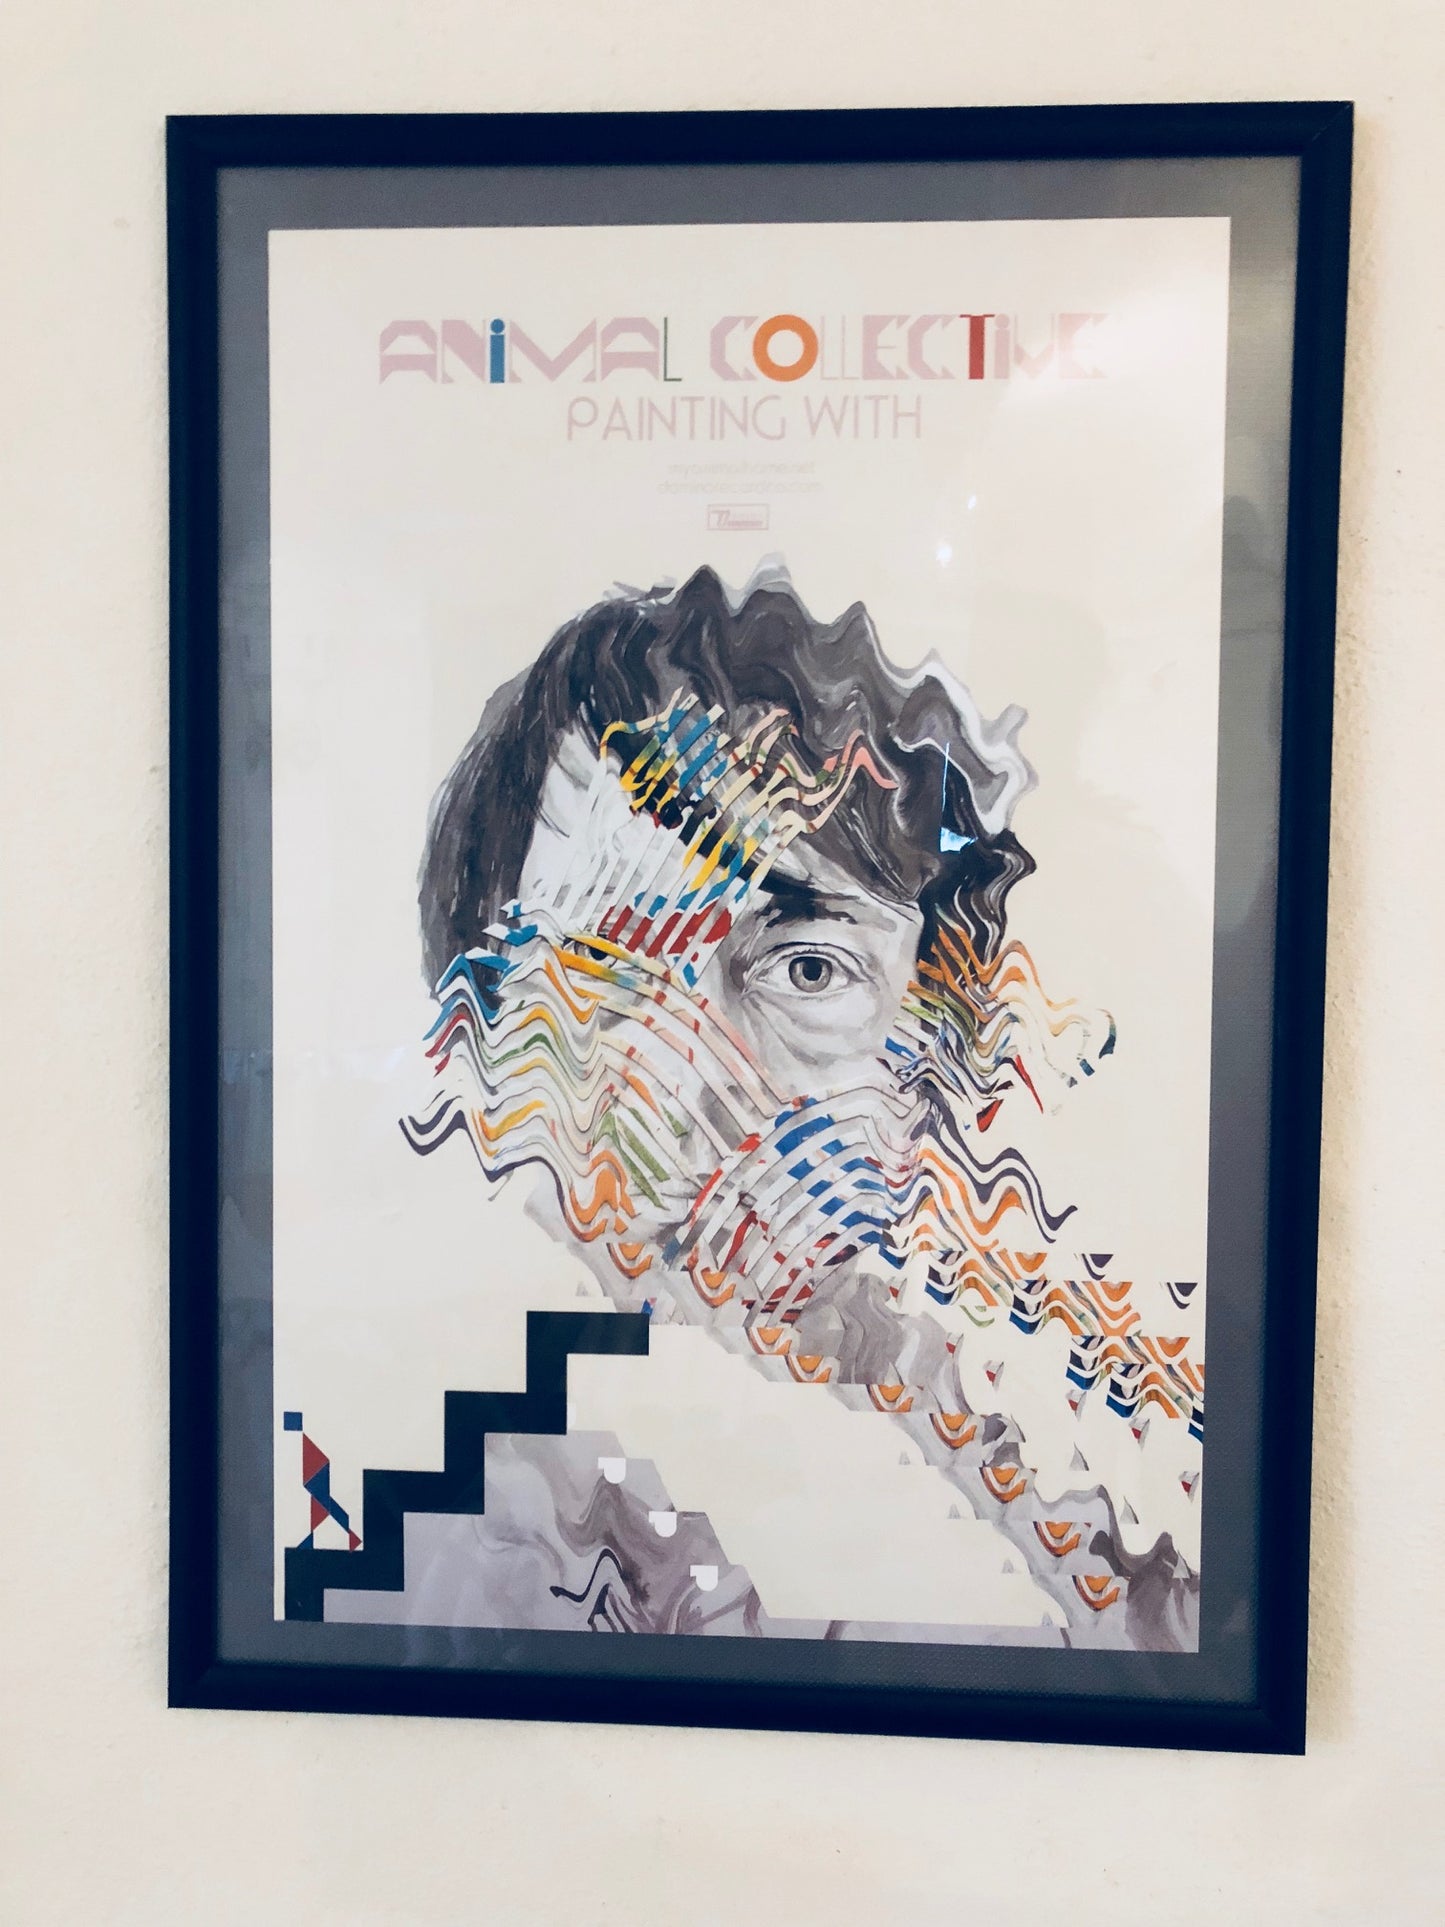 Animal Collective - Painting With - Poster